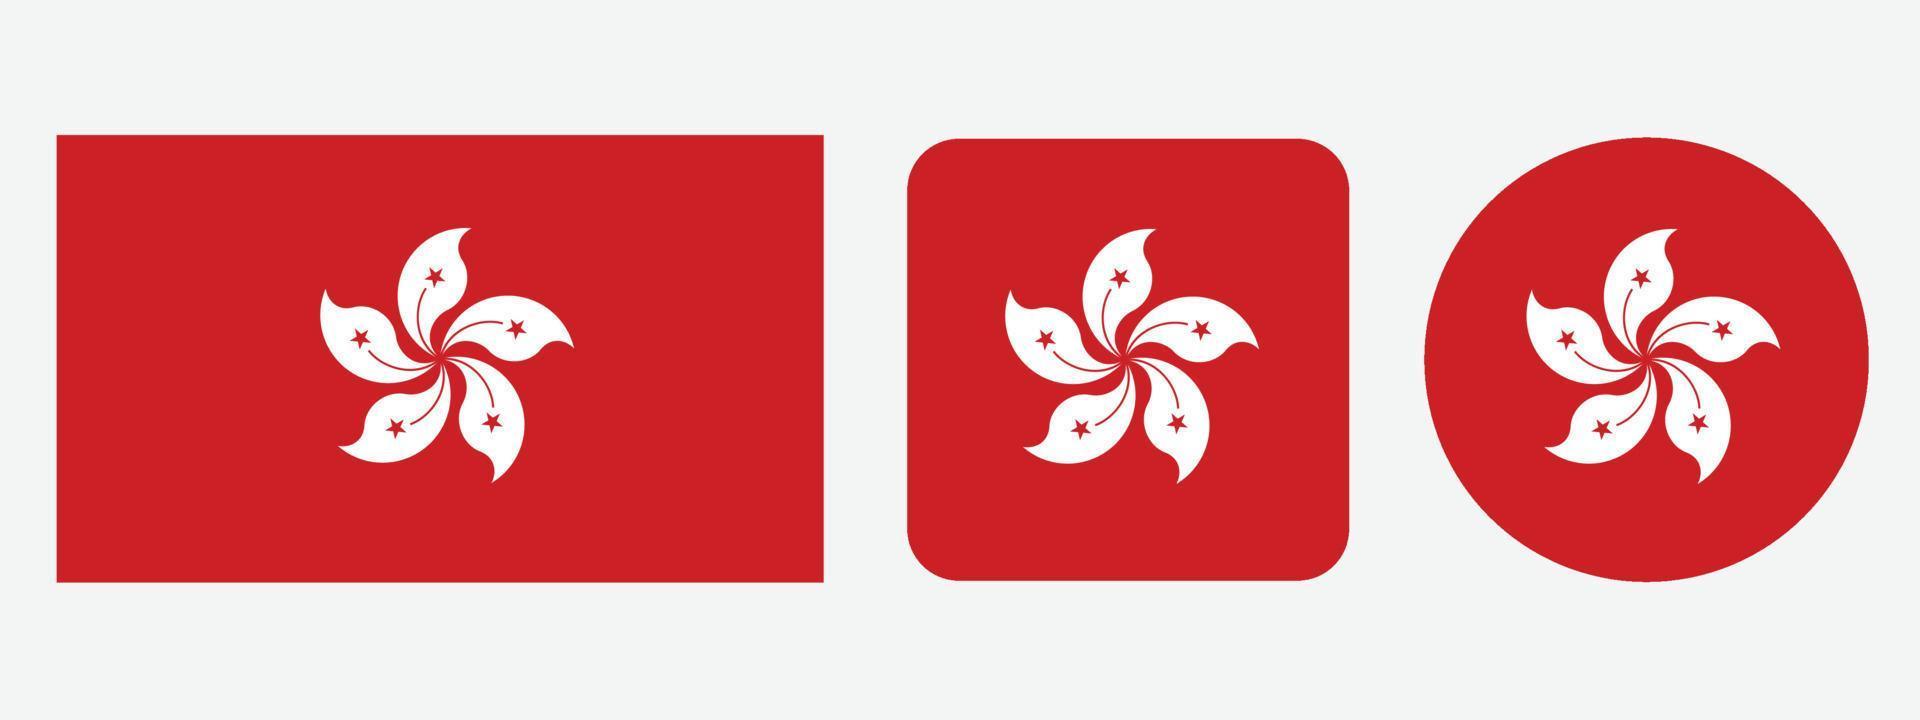 Hong,Kong flag icon . web icon set . icons collection flat. Simple vector illustration.